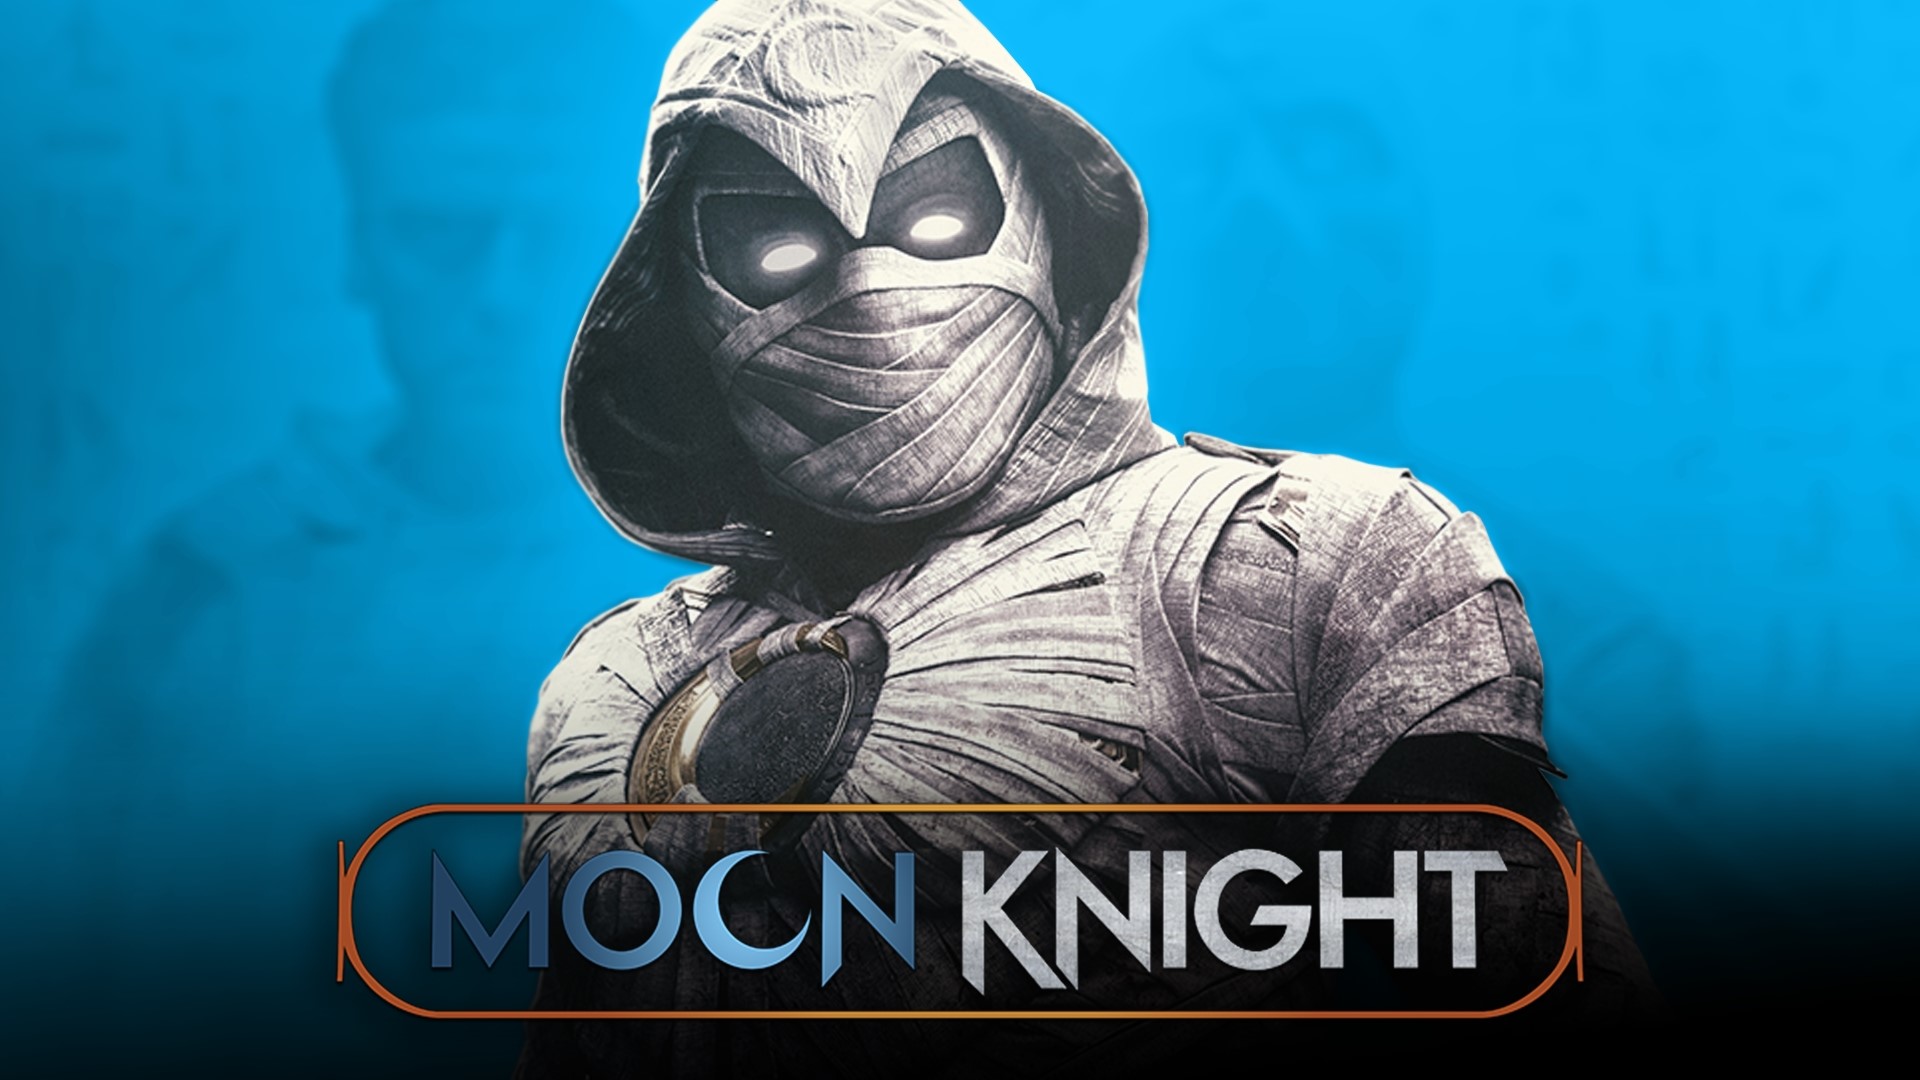 We're about a week late, but here's everything we loved about Moon Knight including admiration for Oscar Isaac and May Calamawy!